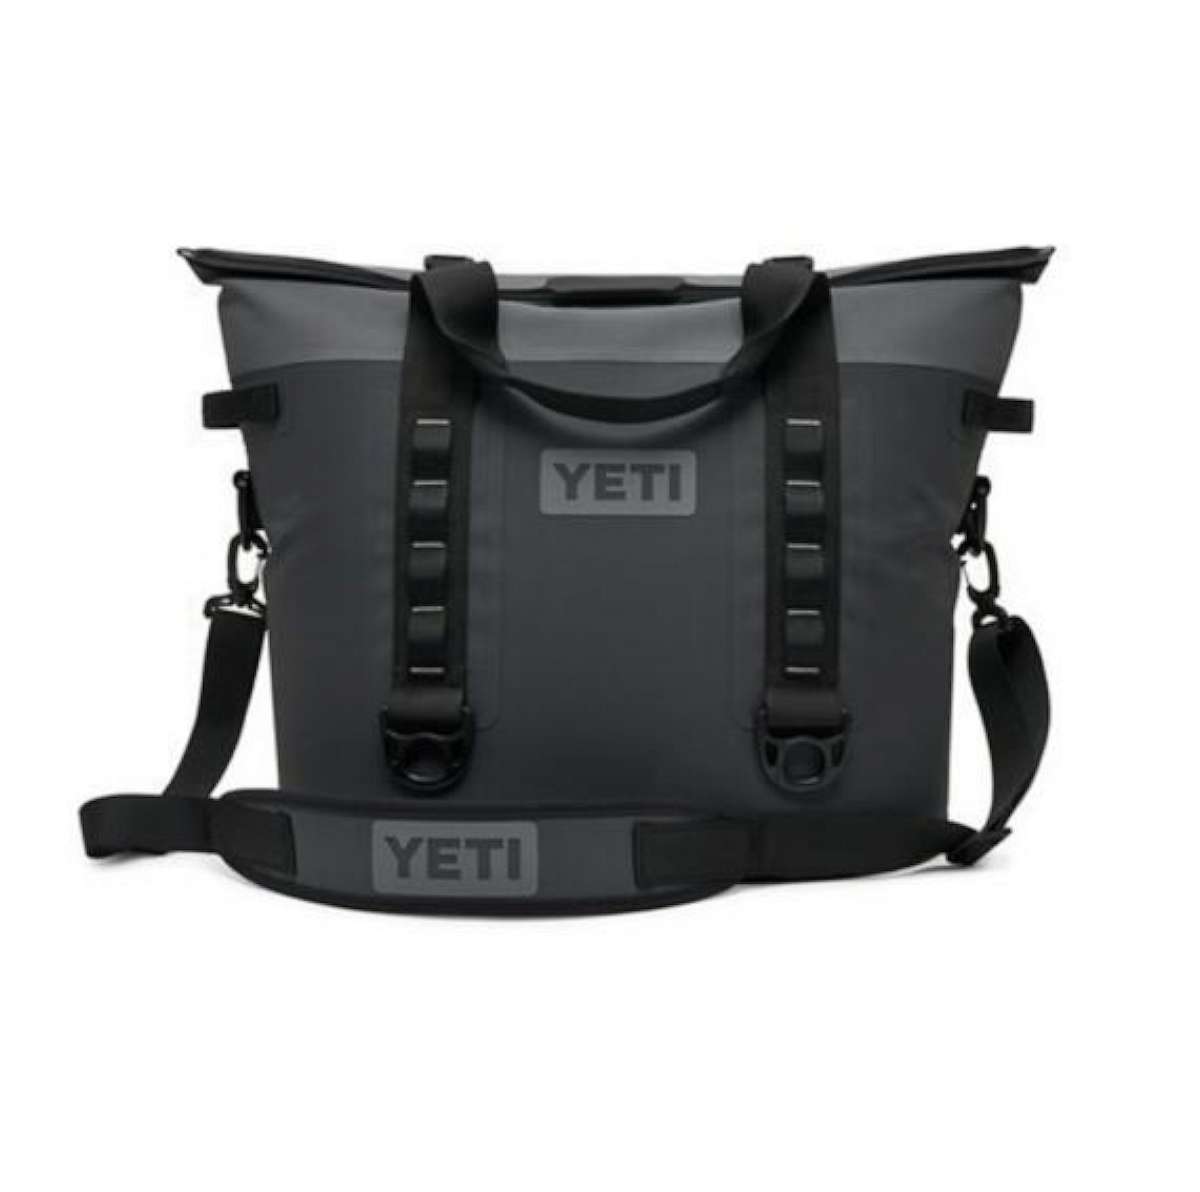 PHOTO: YETI is recalling soft coolers and gear cases, such as this Hopper M30 Soft Cooler, due to magnet ingestion hazard.